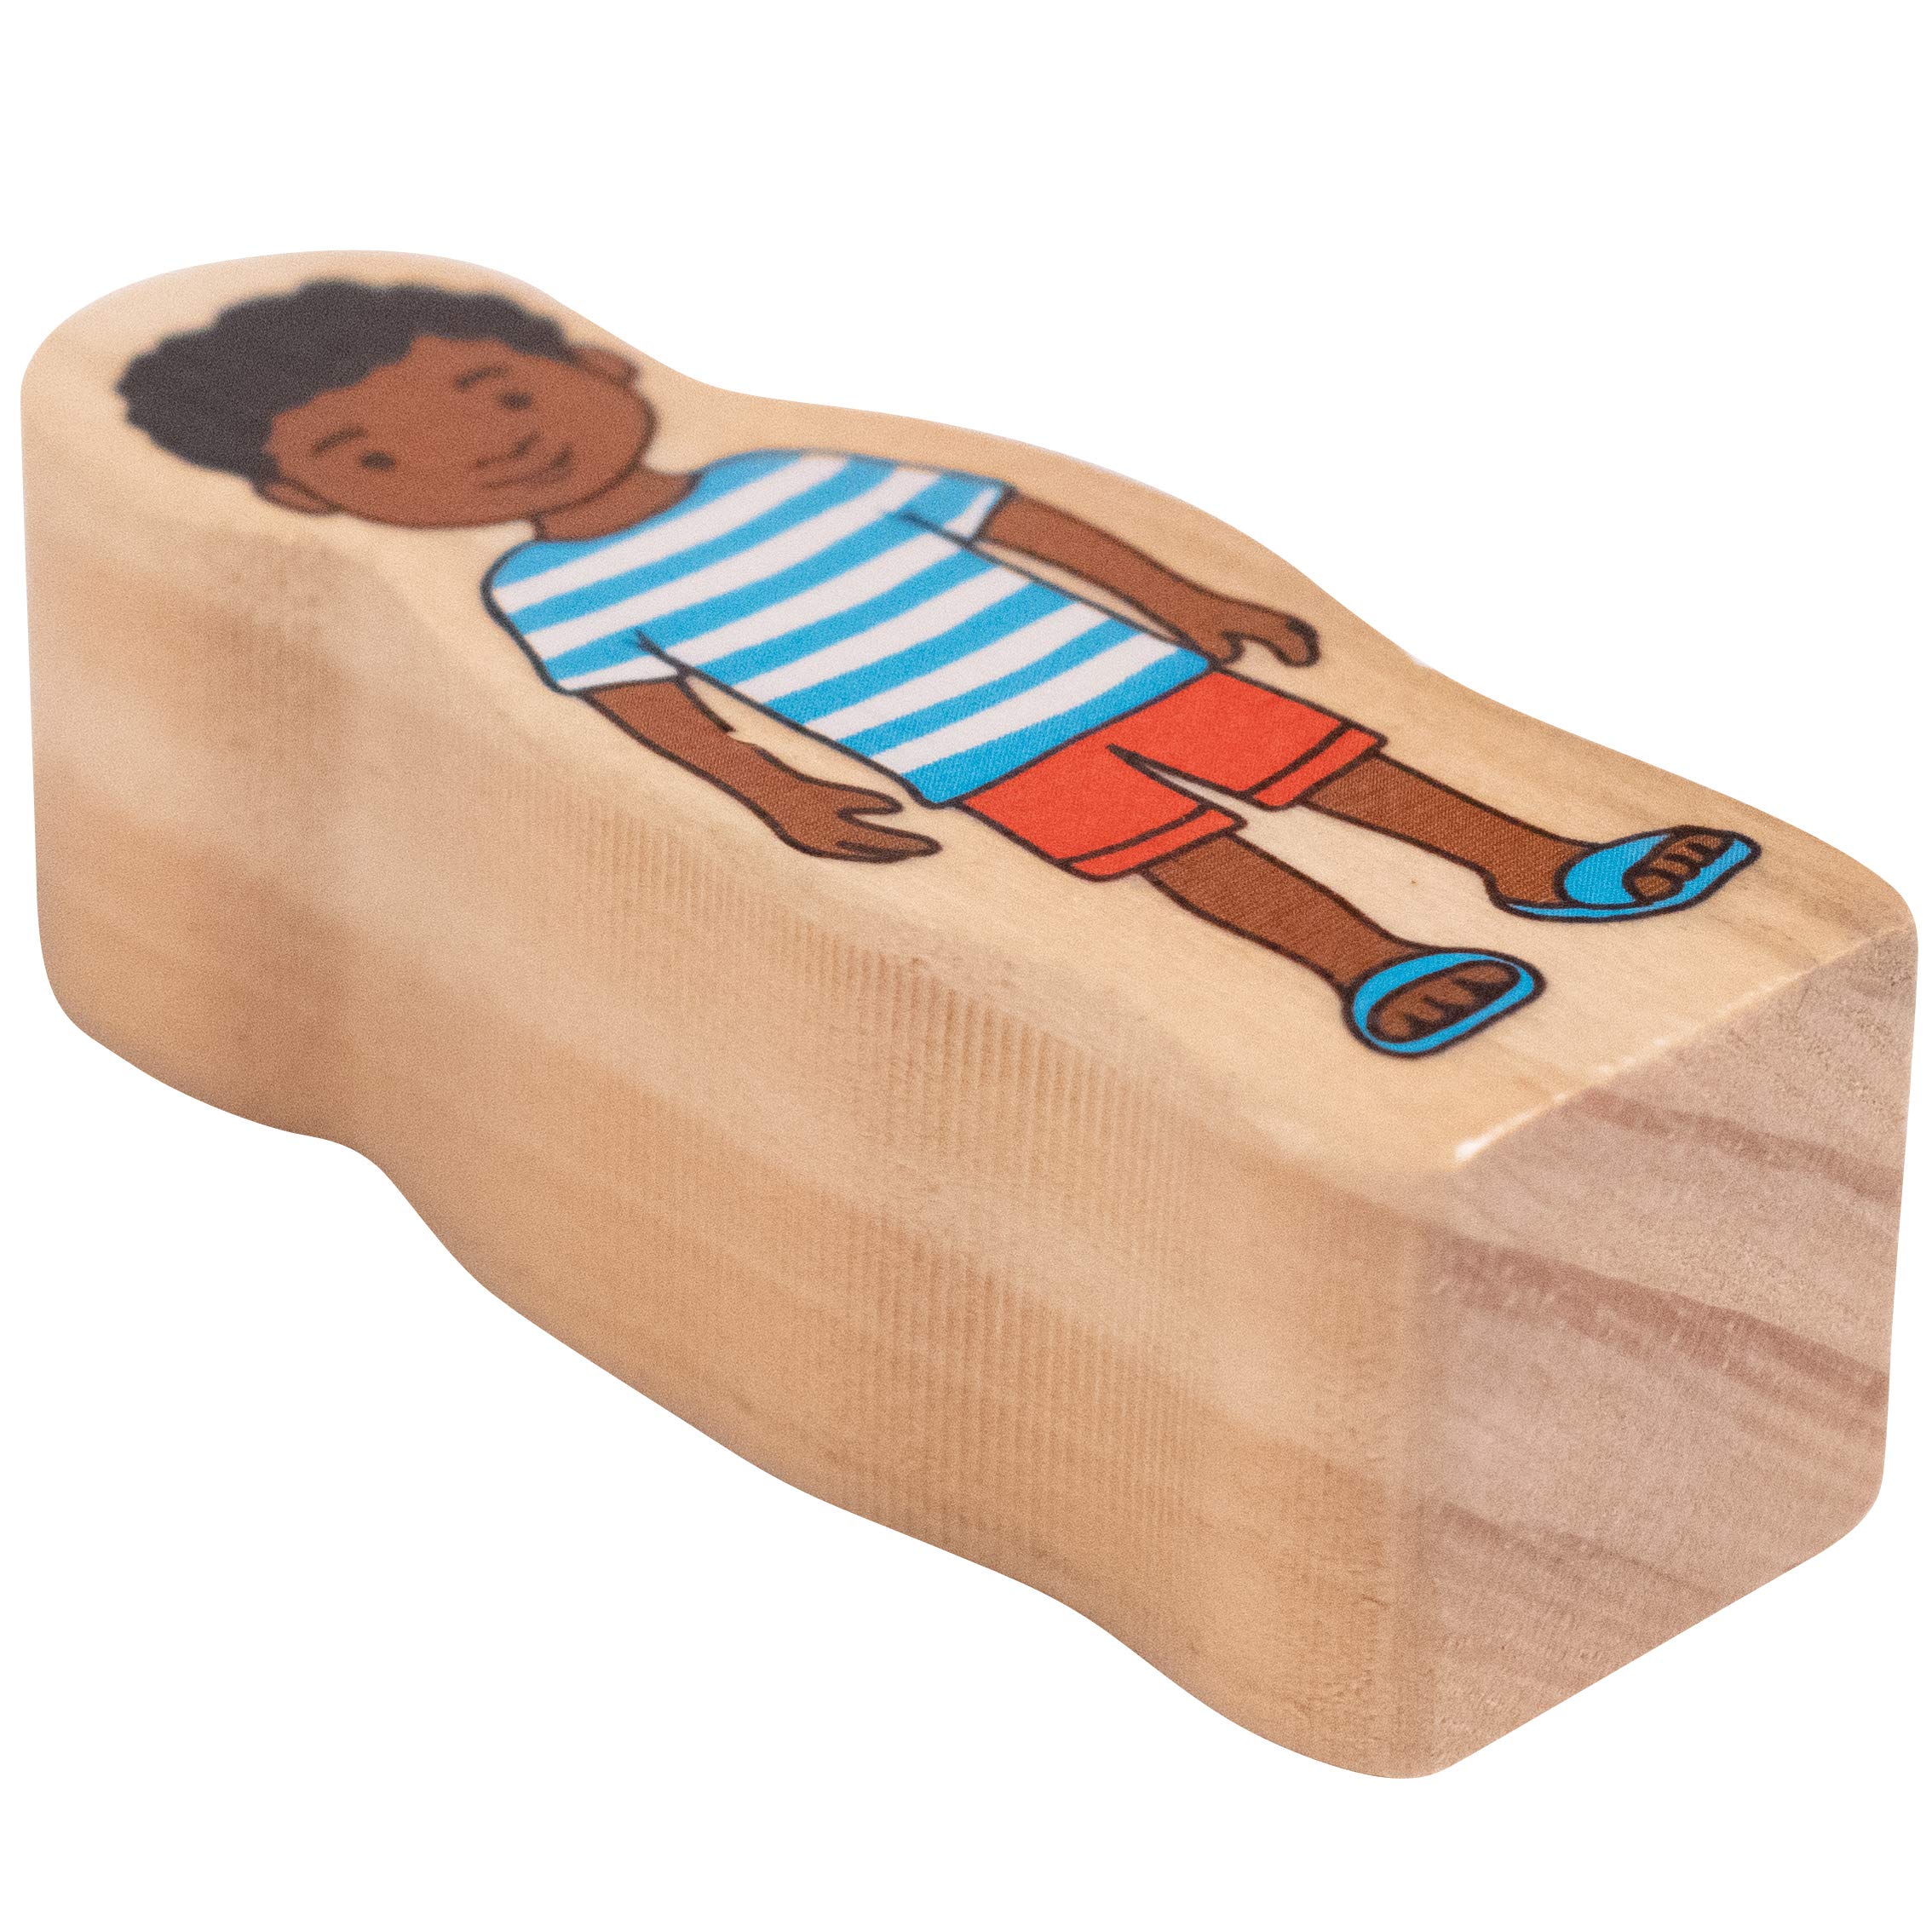 The Freckled Frog - FF420 My Family - Set of 30 - Ages 1+ - Inclusive Wooden Blocks for Toddlers – Includes Grandparents, Moms, Dads and Children Around the World - Double-Sided